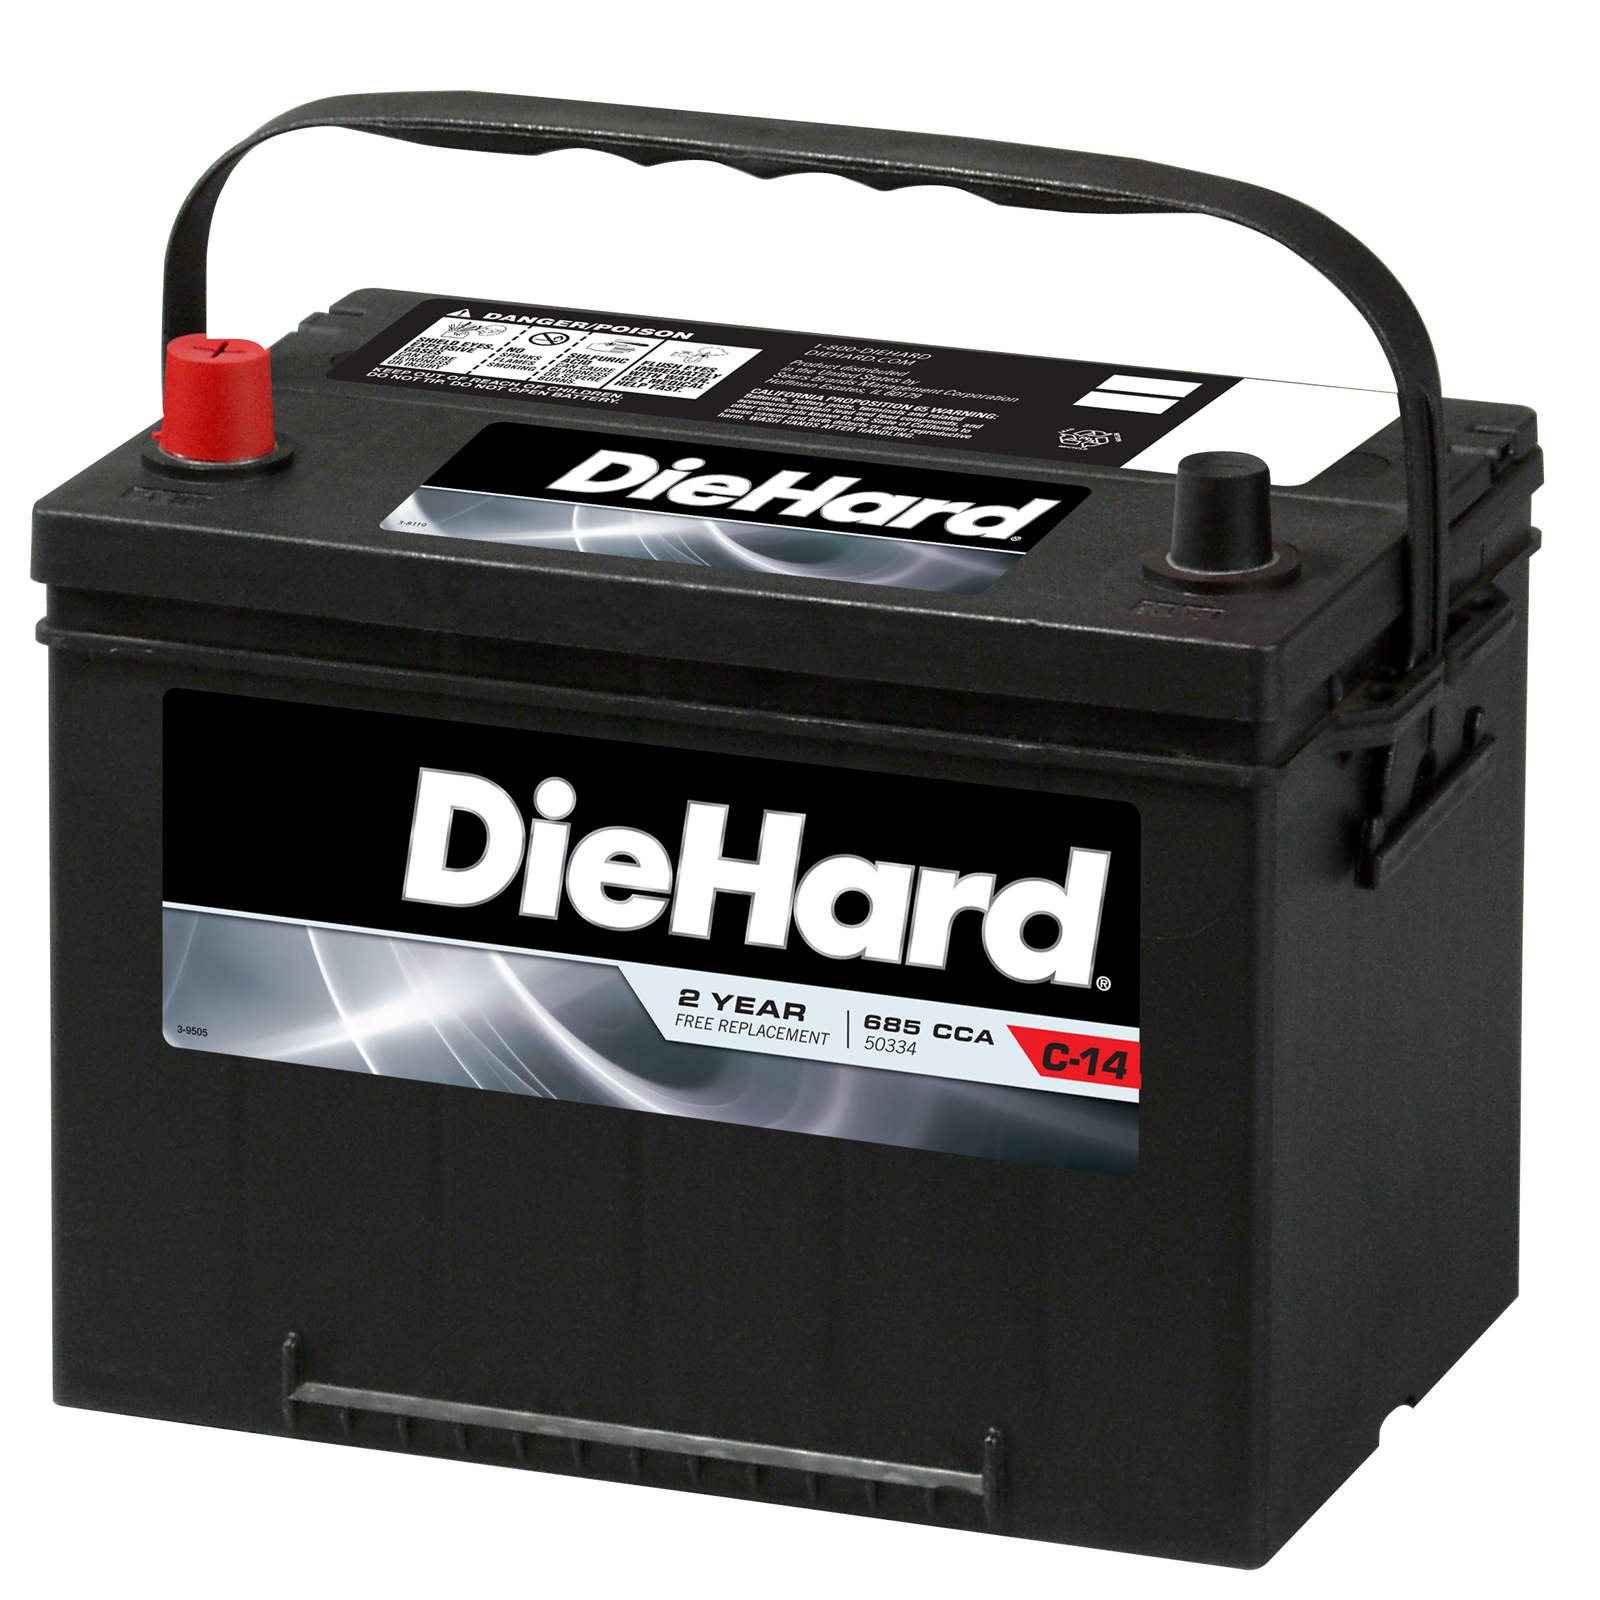 DieHard Automotive Battery - Group Size EP-34 (Price with Exchange)